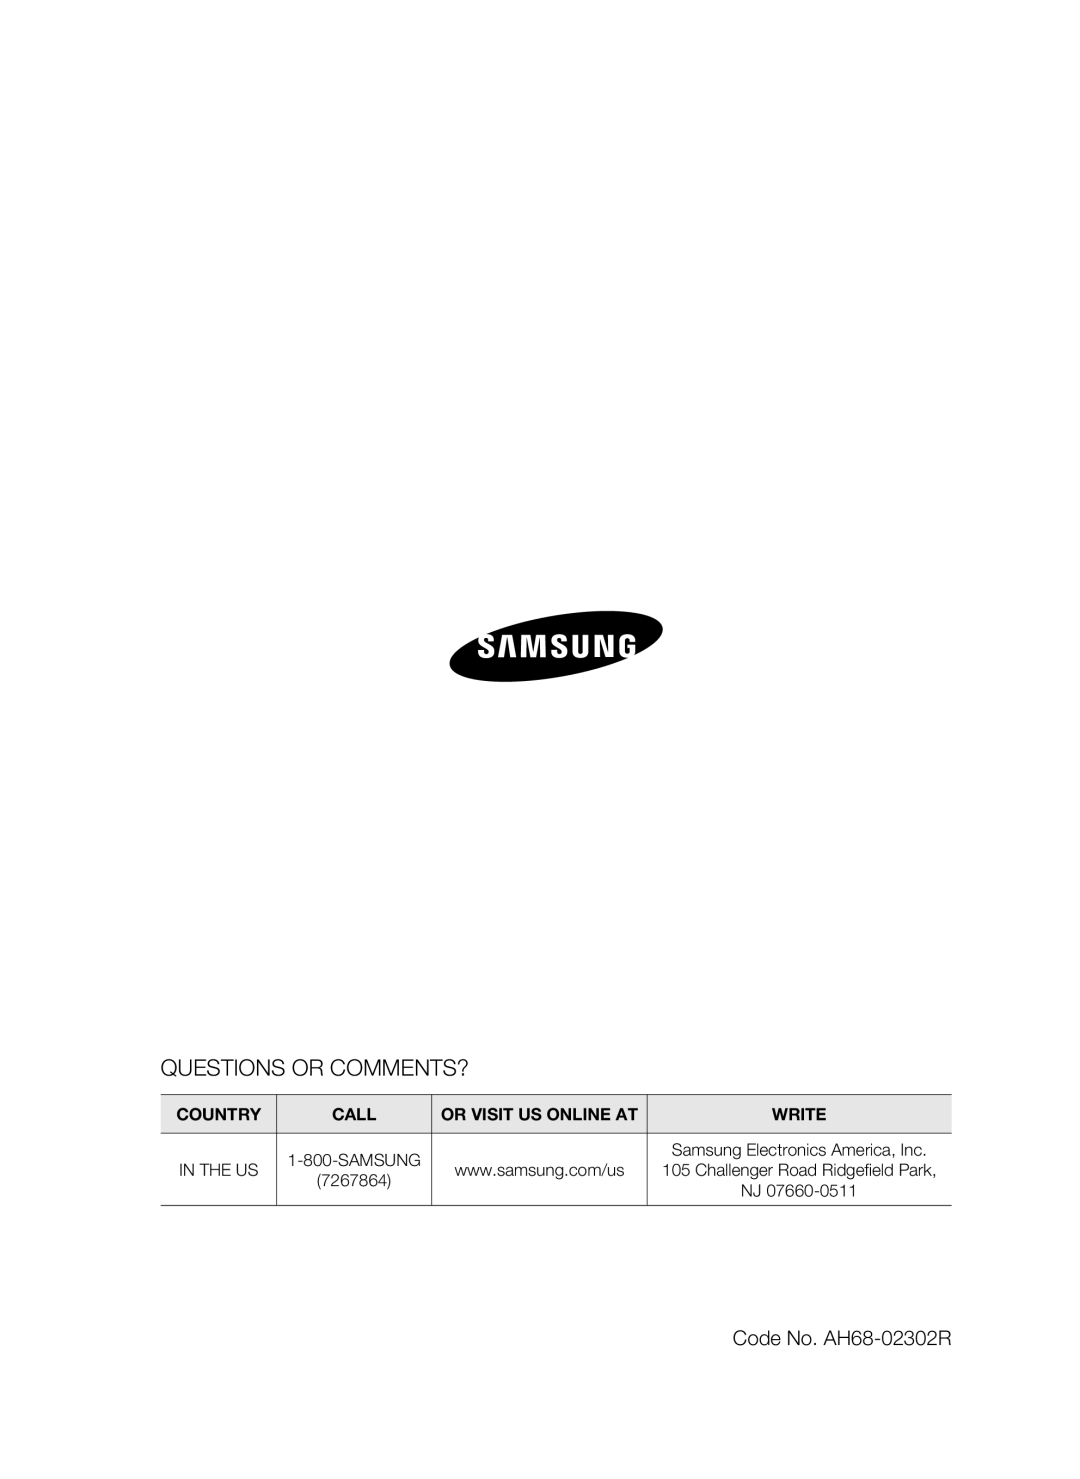 Samsung C6600 user manual Questions Or Comments?, Code No. AH68-02302R, Country, Call, Or Visit Us Online At, Write 